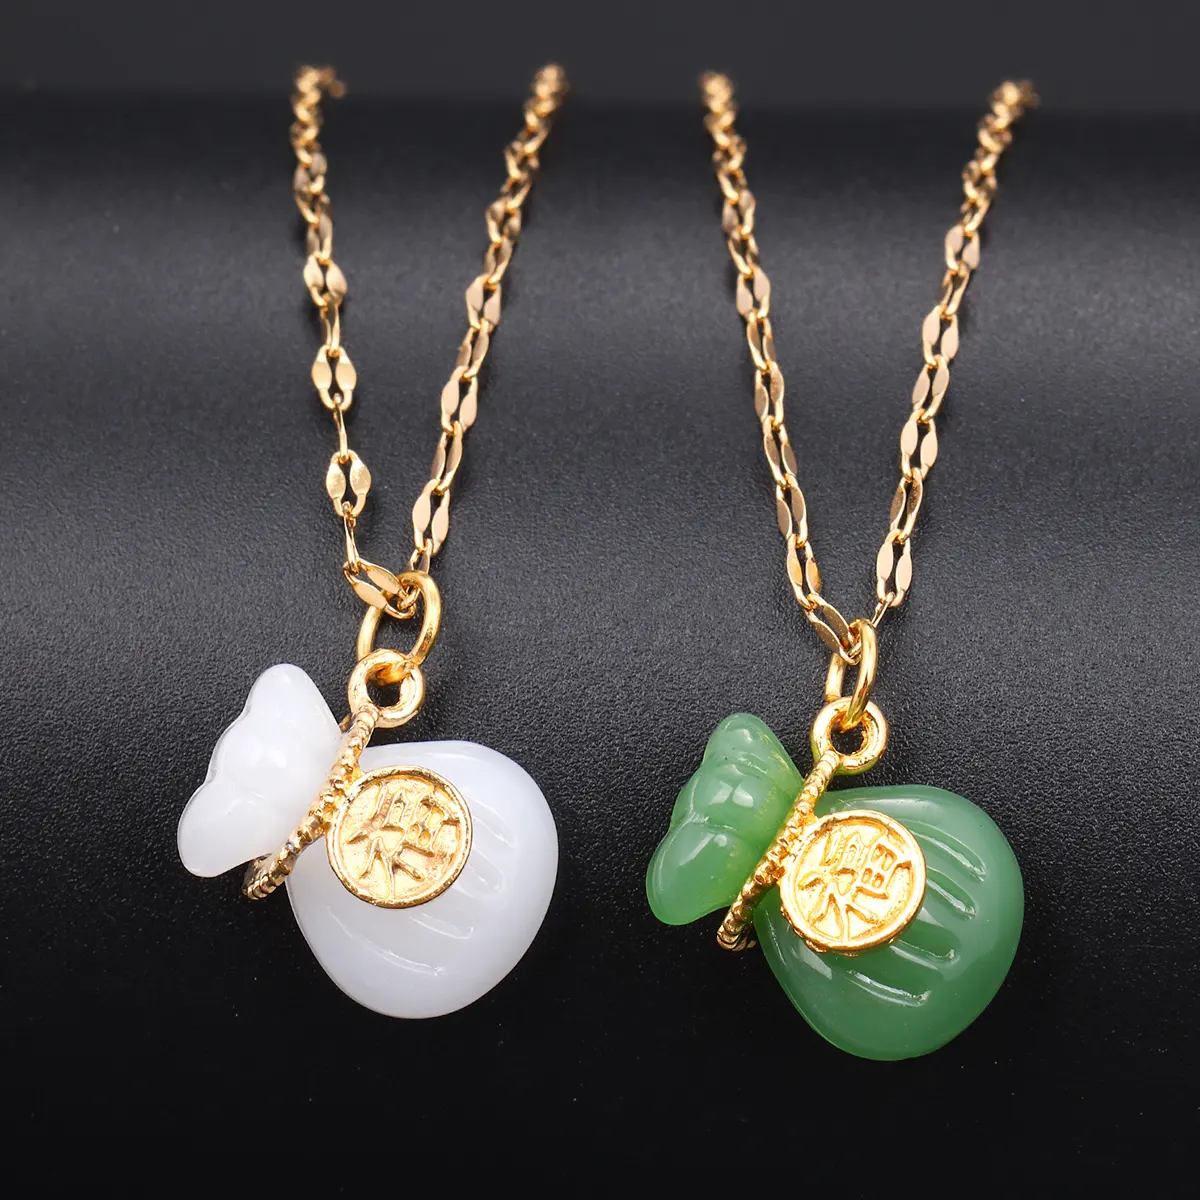 Fashion Hotsale Stainless Steel Chain Jade Necklace Vintage Gold Plated Money Pocket Pendant Necklace Lucky Jewelry